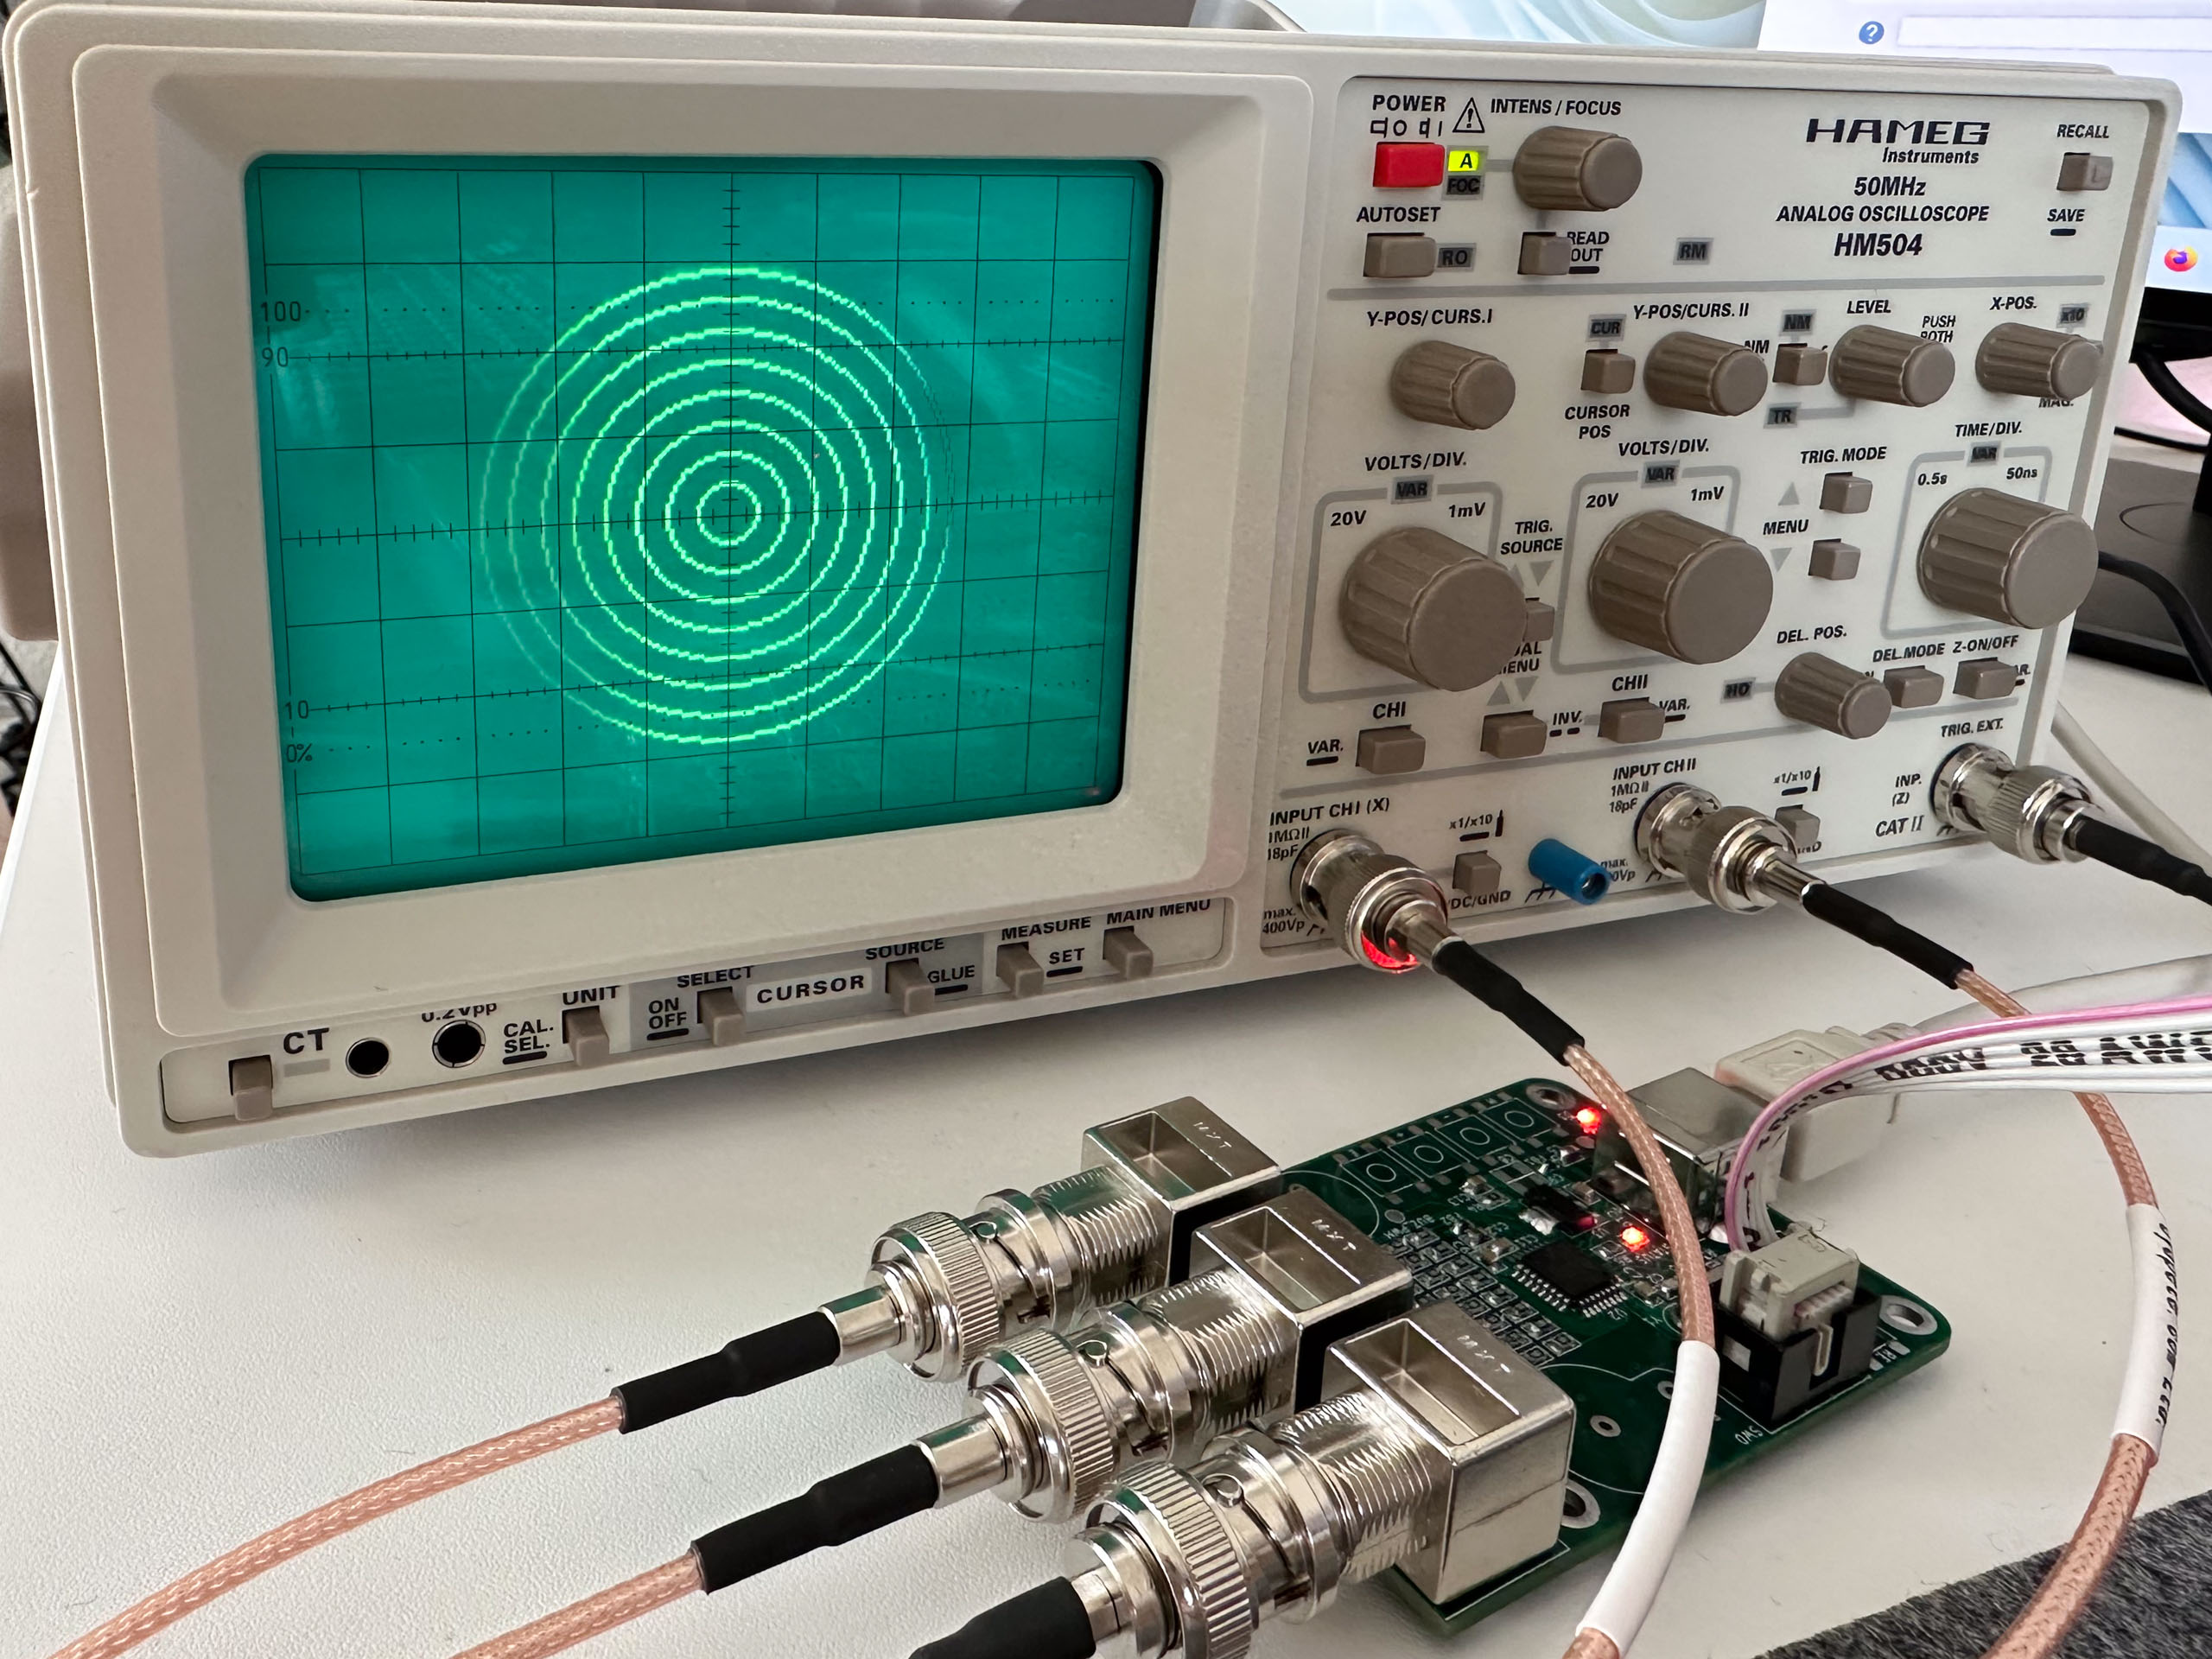 Displaying graphics and text on an oscilloscope screen